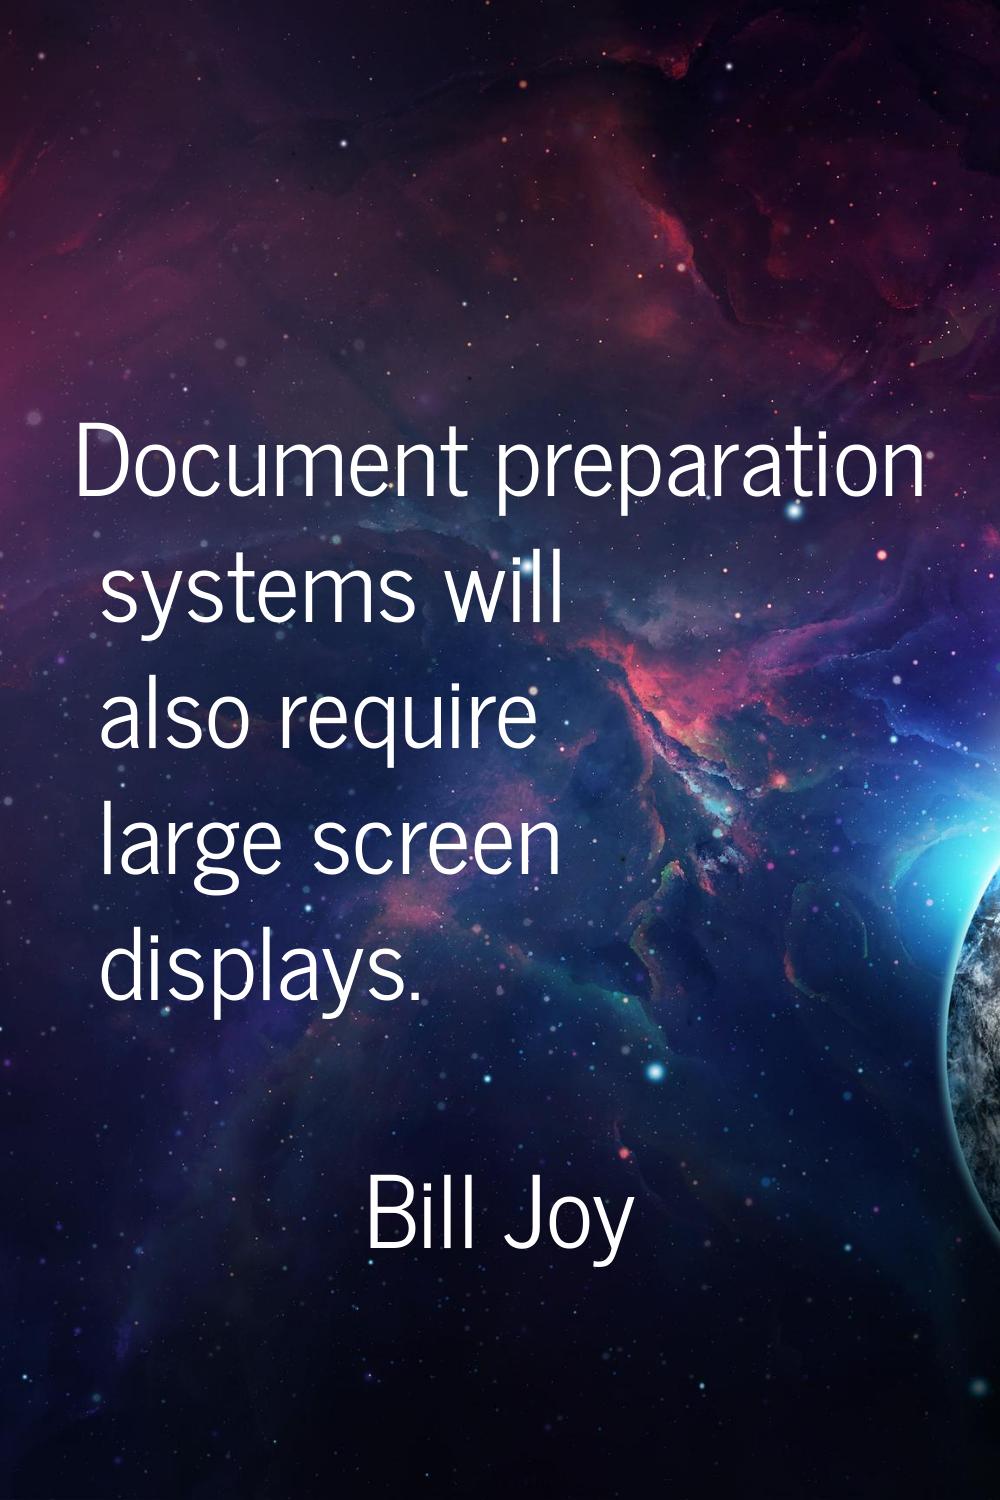 Document preparation systems will also require large screen displays.